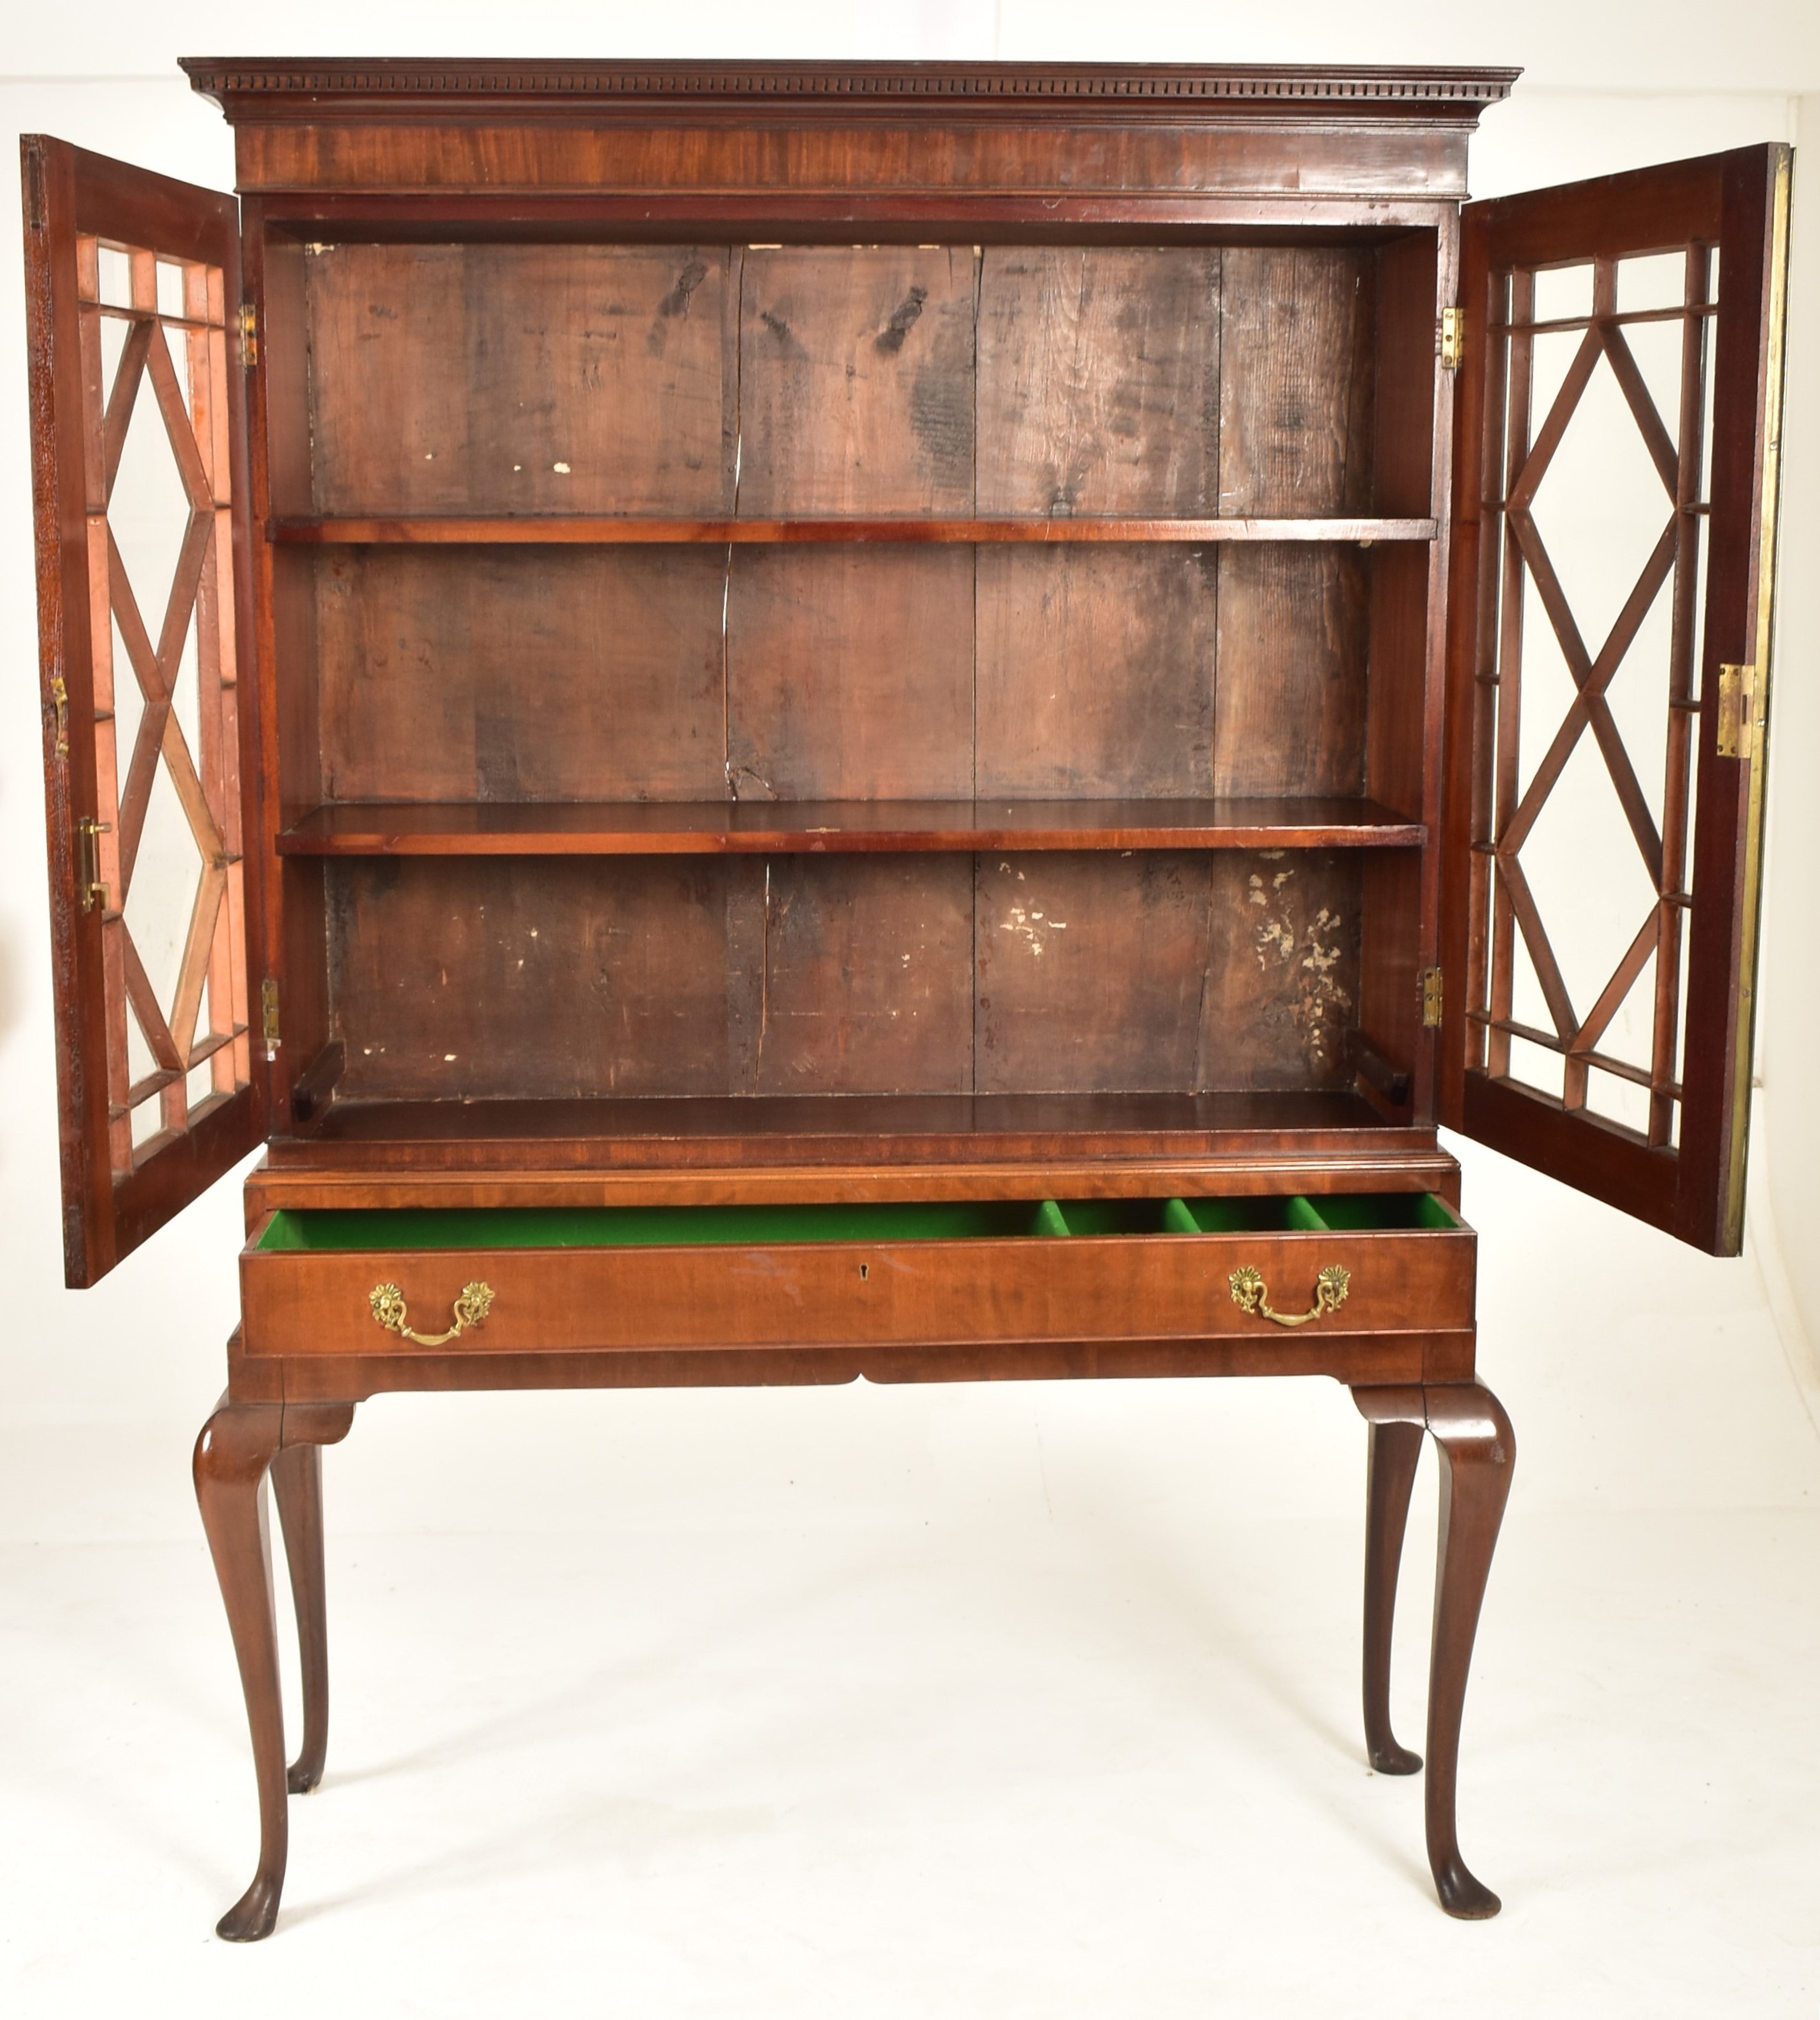 VICTORIAN 19TH CENTURY MAHOGANY CABINET ON STAND - Image 2 of 6